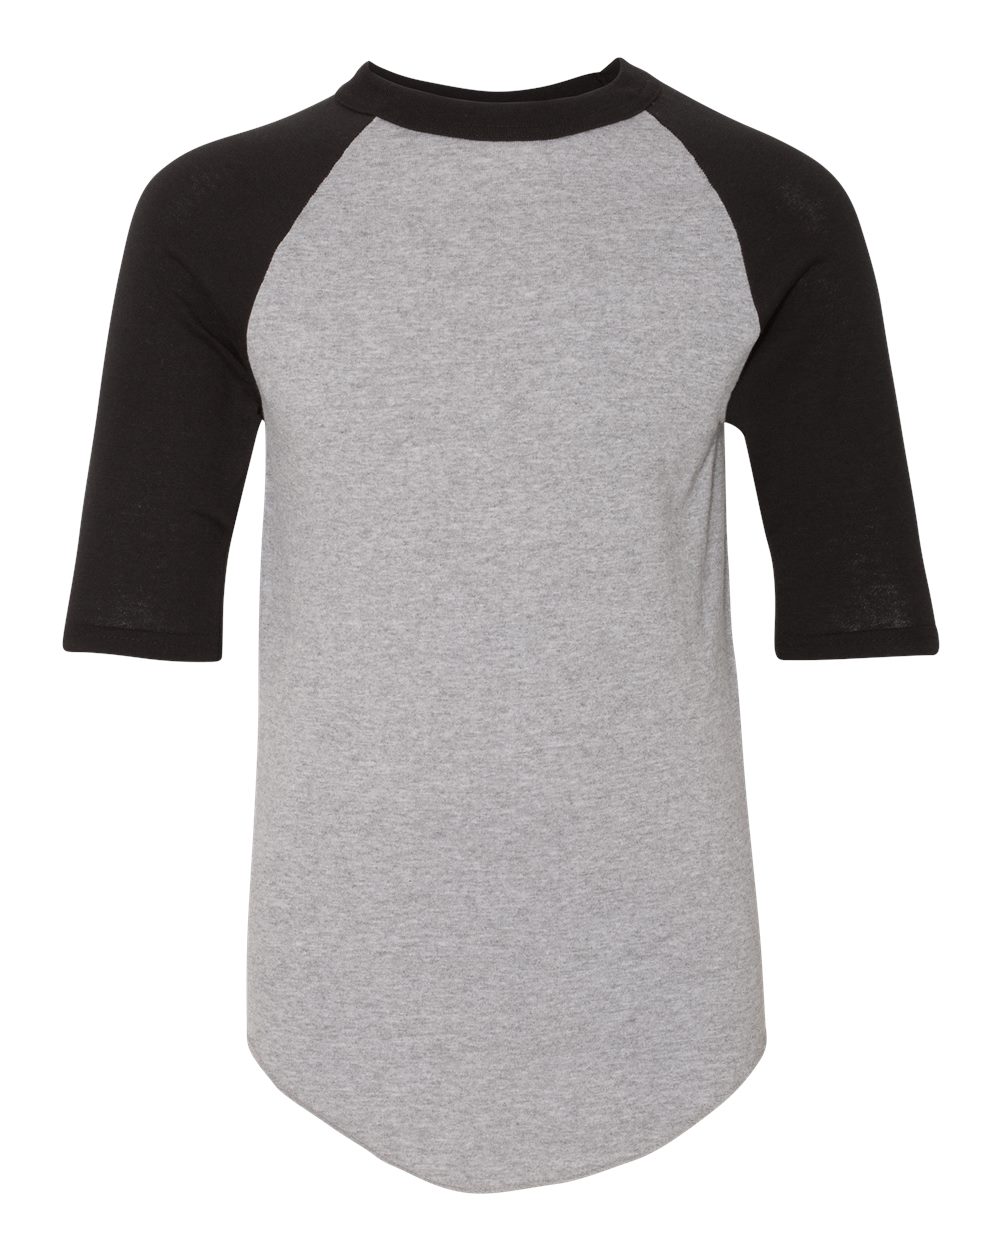 click to view Athletic Heather/ Black